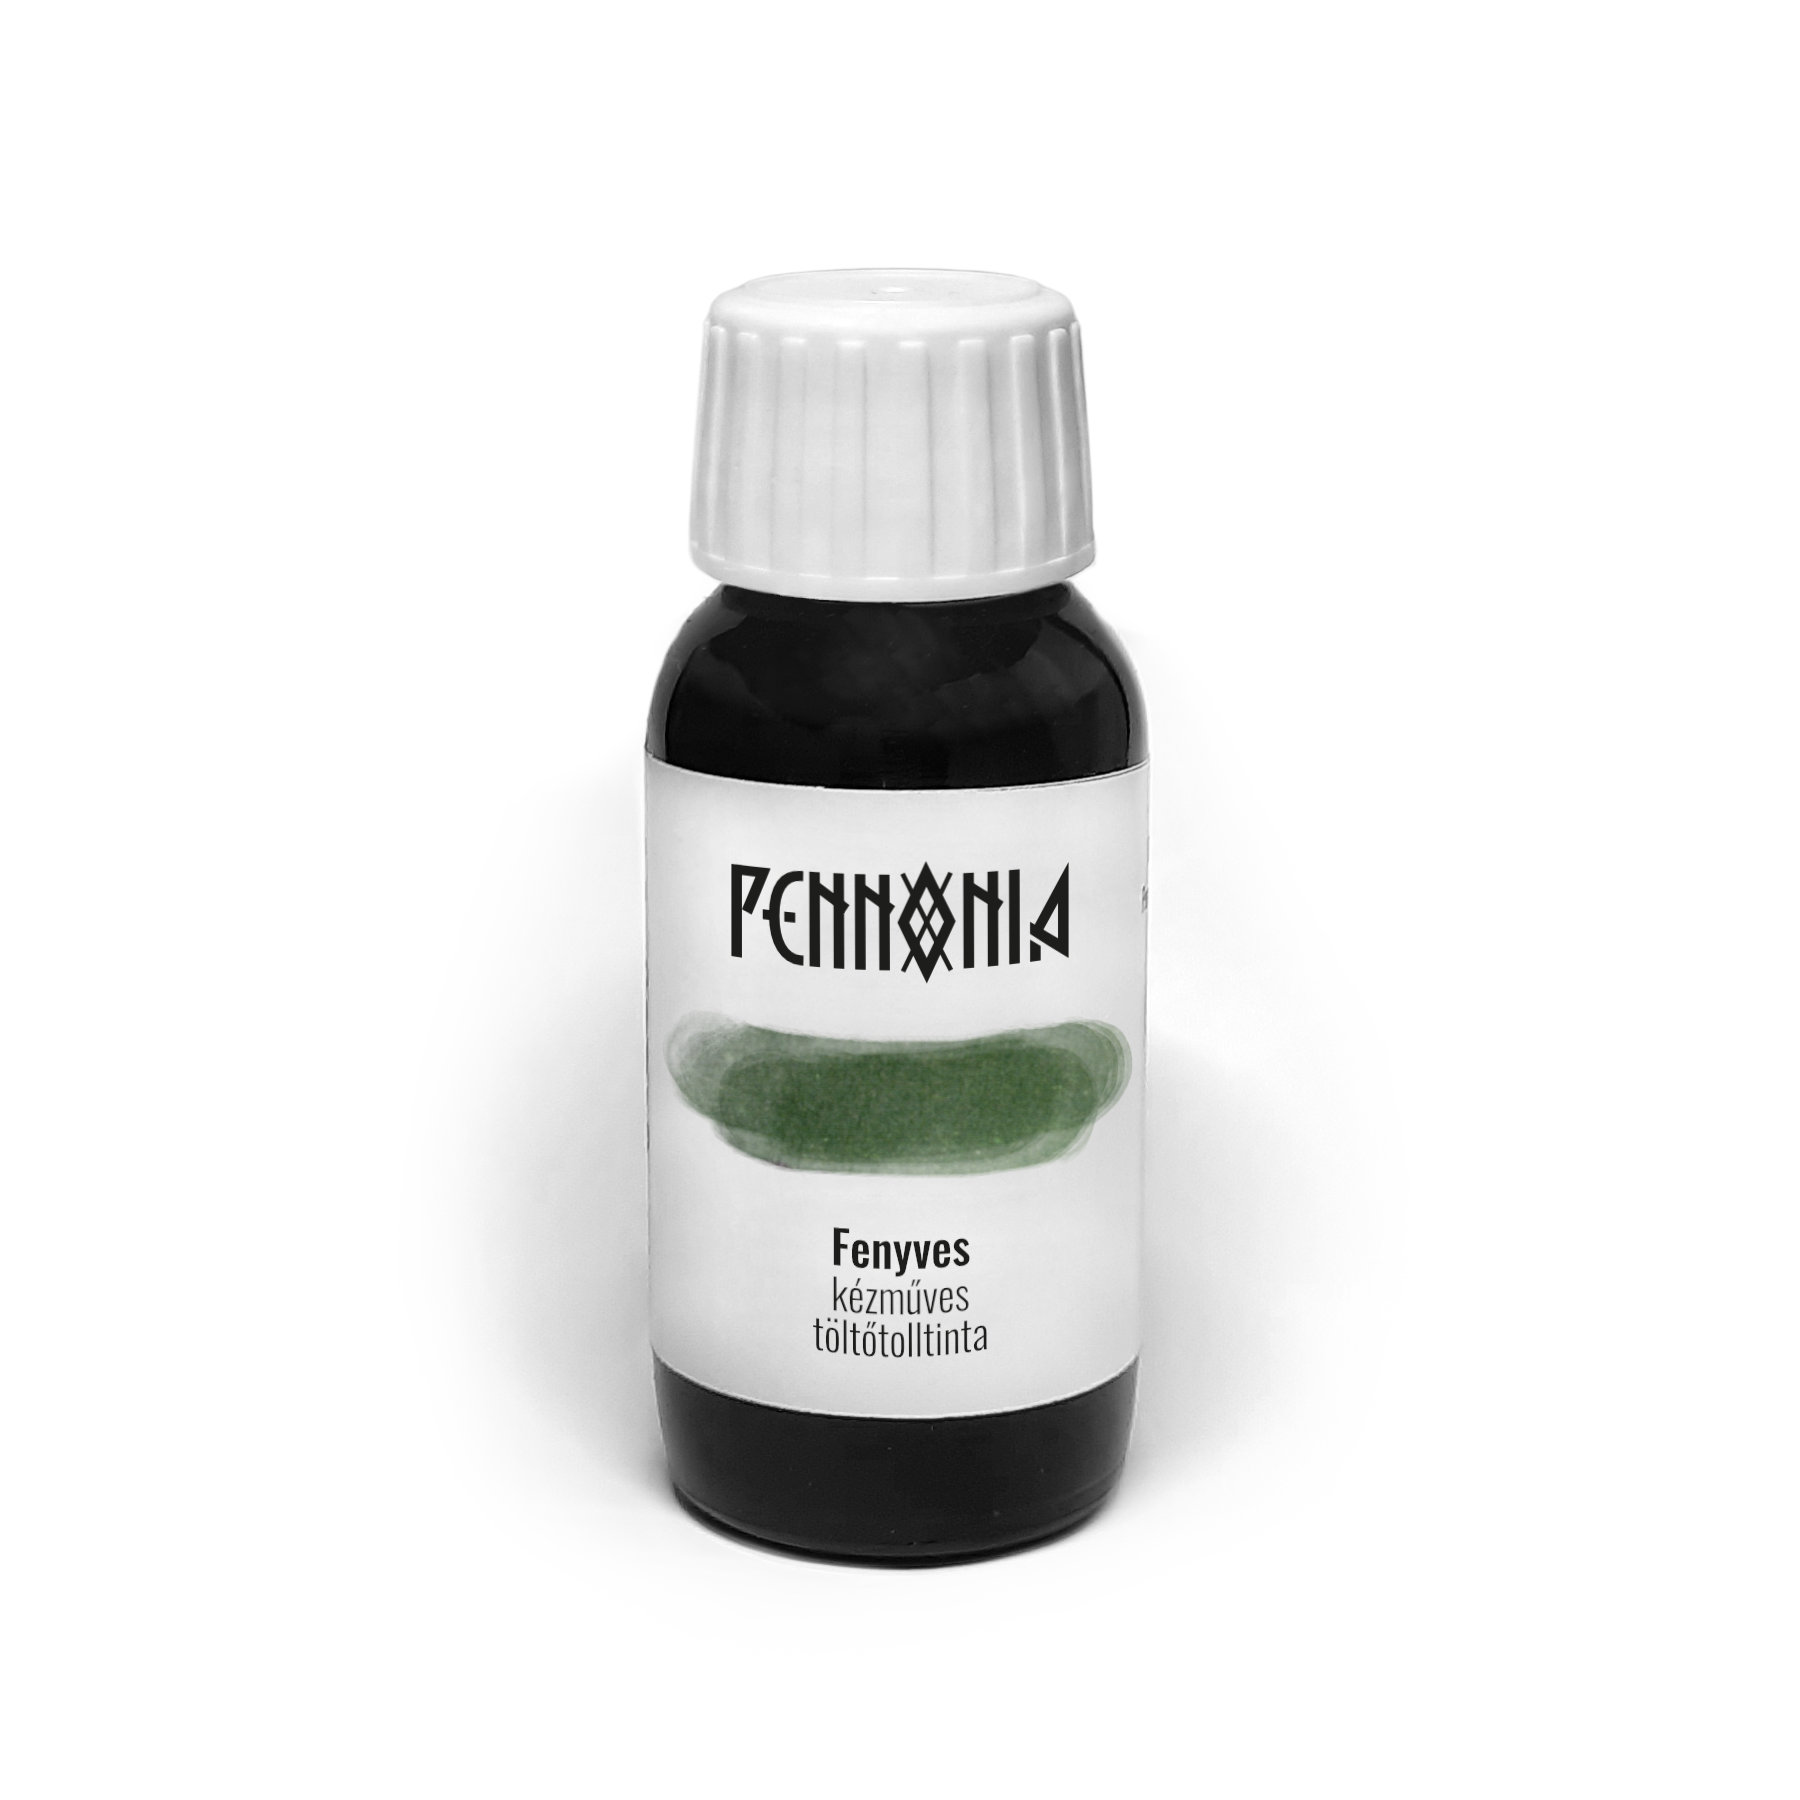 Pennonia Fenyves Boreal Forest ink